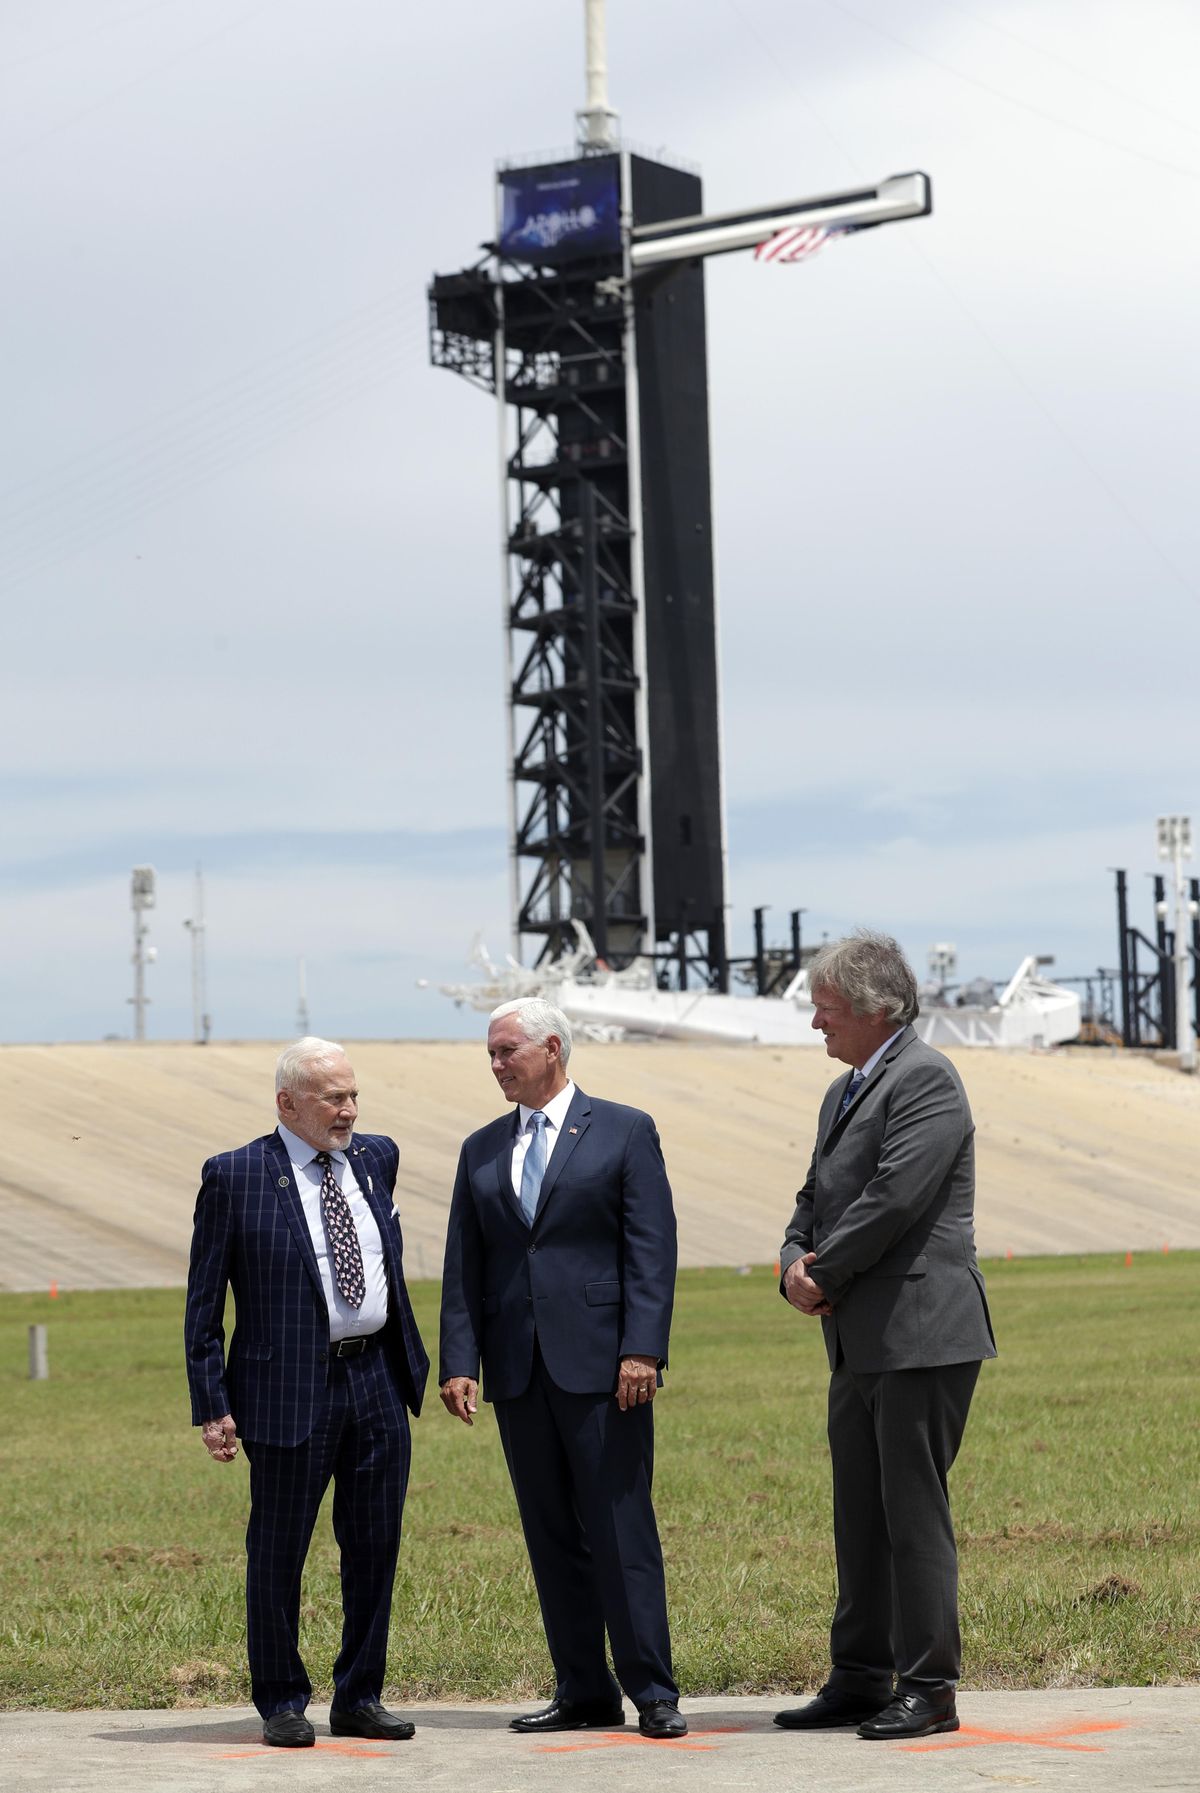 Apollo astronaut Buzz Aldrin, left, talks with Vice President Mike Pence, center, and Rick Armstrong, son of Apollo 11 astronaut Neil Armstrong, as they gather at pad 39a at the Kennedy Space Center where the launch of Apollo 11 took place 50 years ago on this anniversary of the moon landing, Saturday, July 20, 2019, in Cape Canaveral, Fla. (John Raoux / Associated Press)